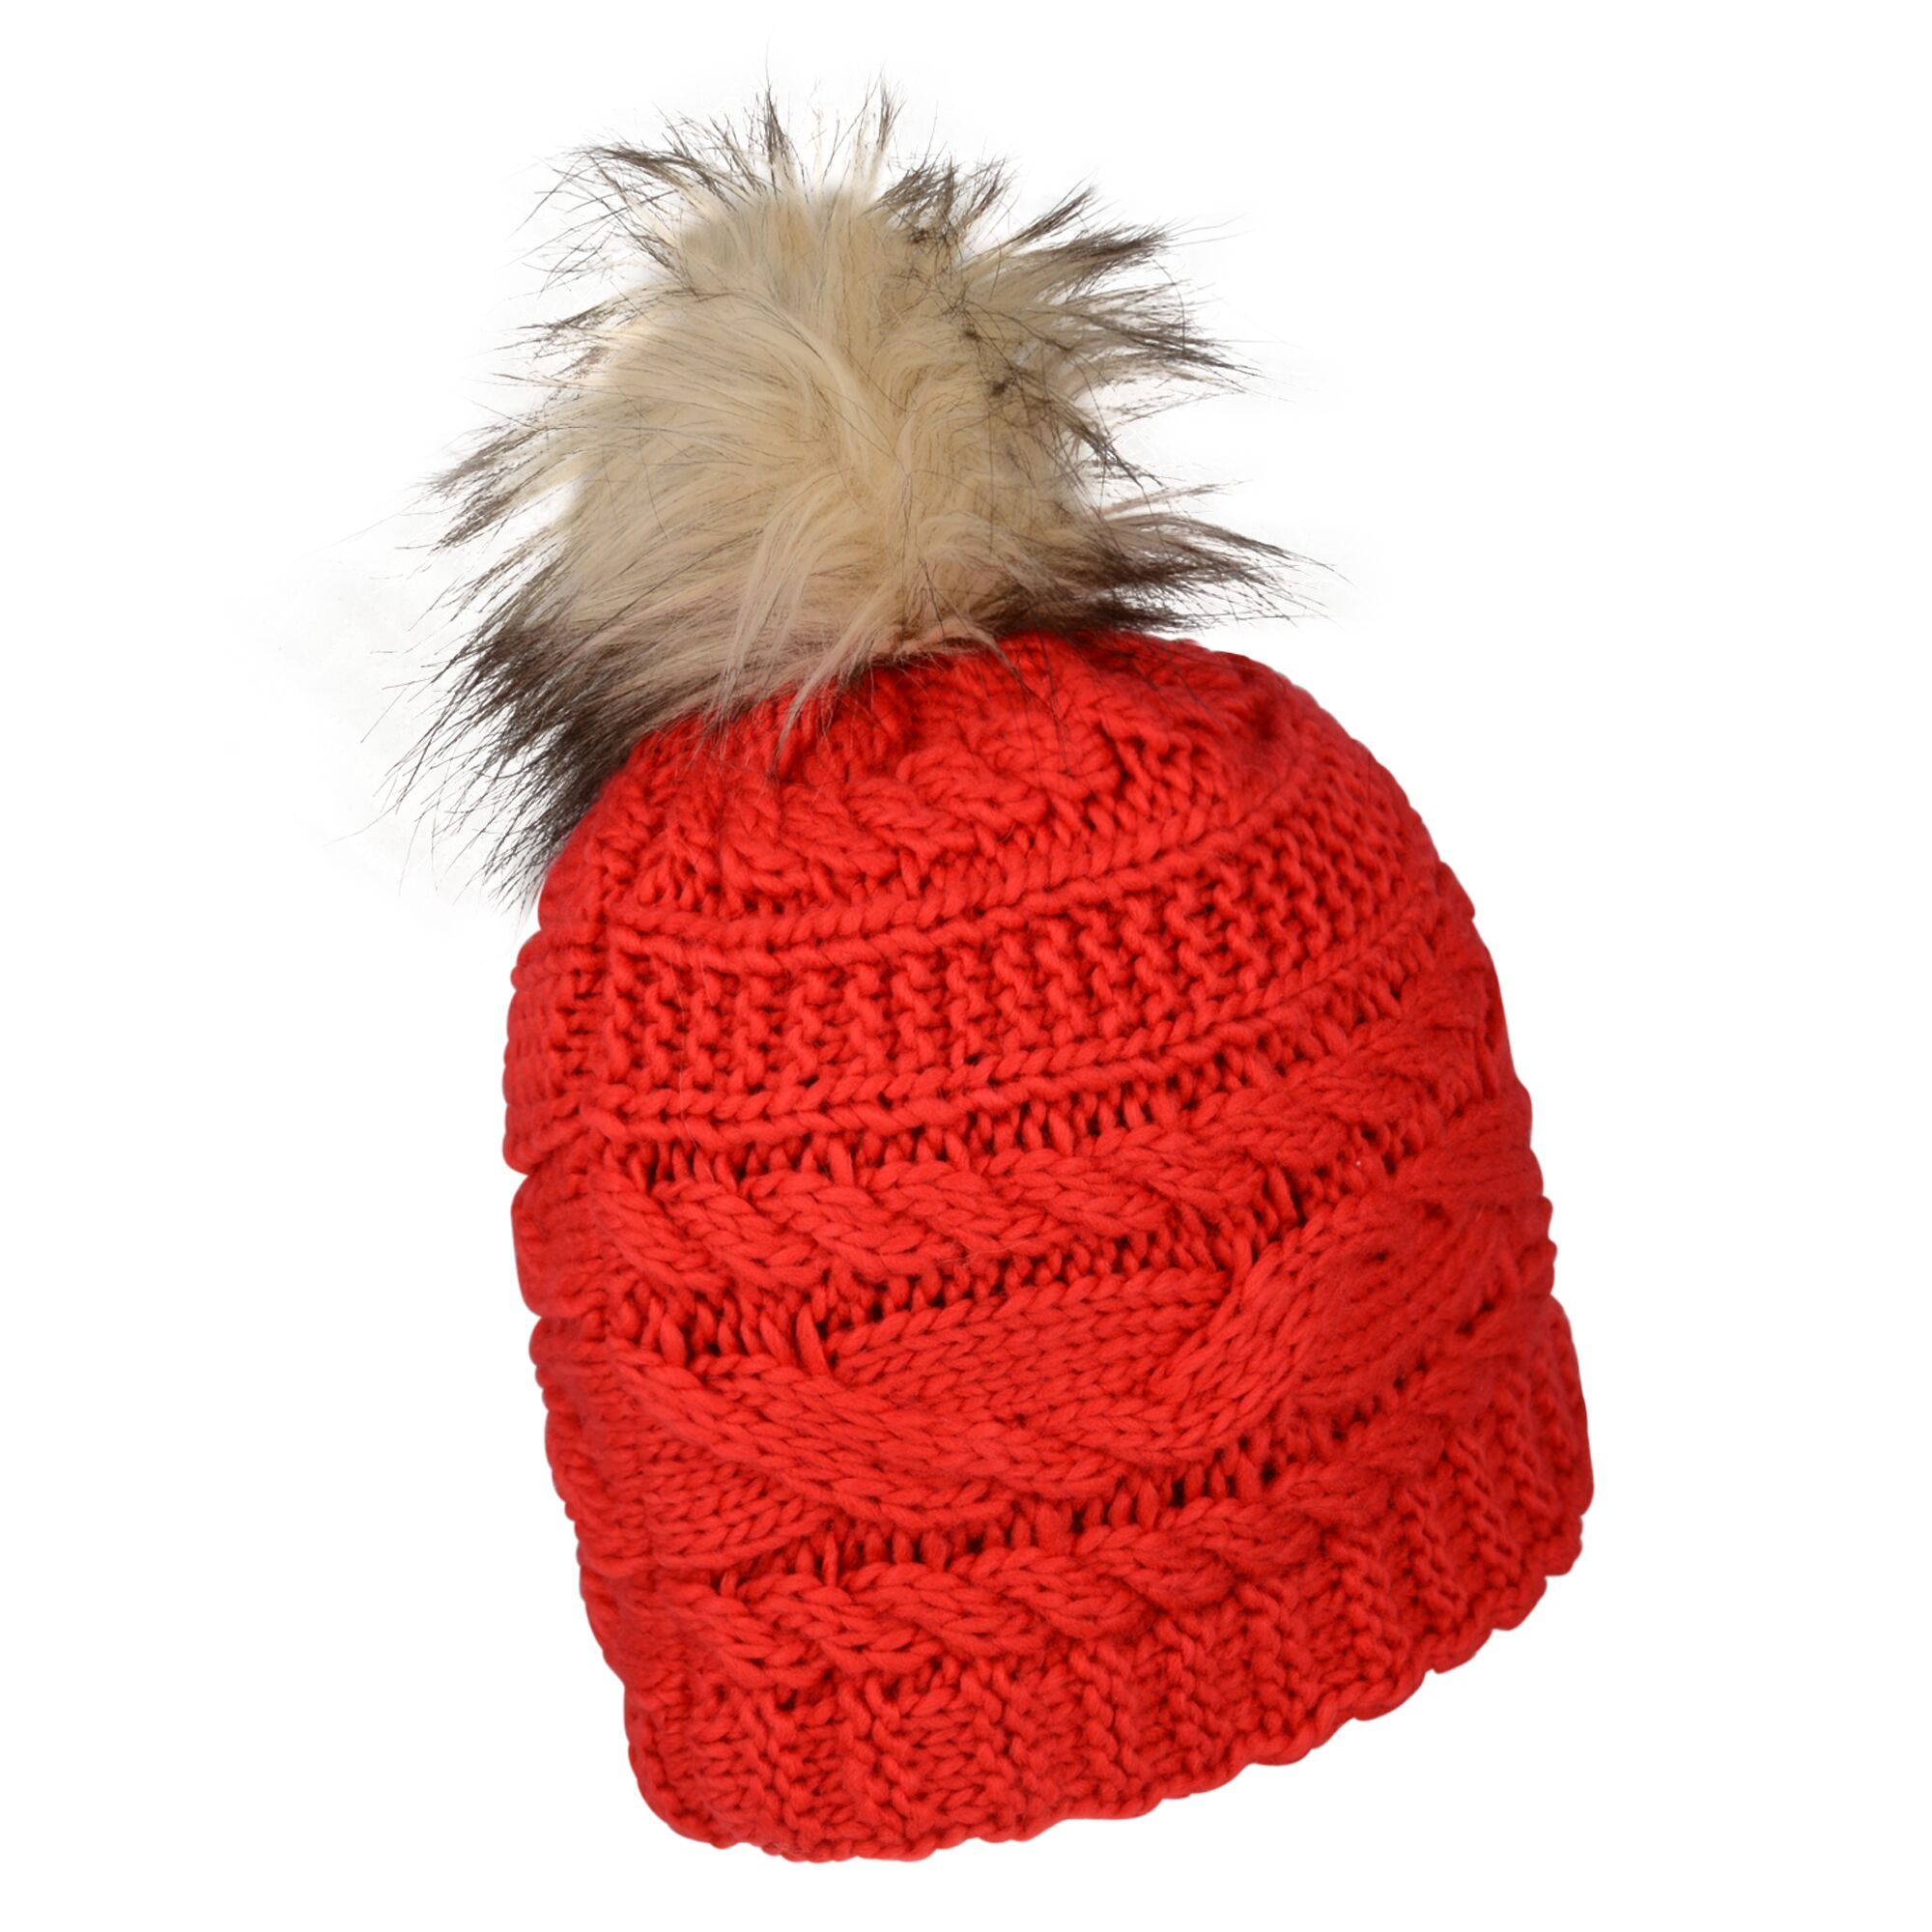 Material: acrylic: 100%. Soft knit construction. Fleece lining. Faux fur bobble. Knitted ribbed cuff.